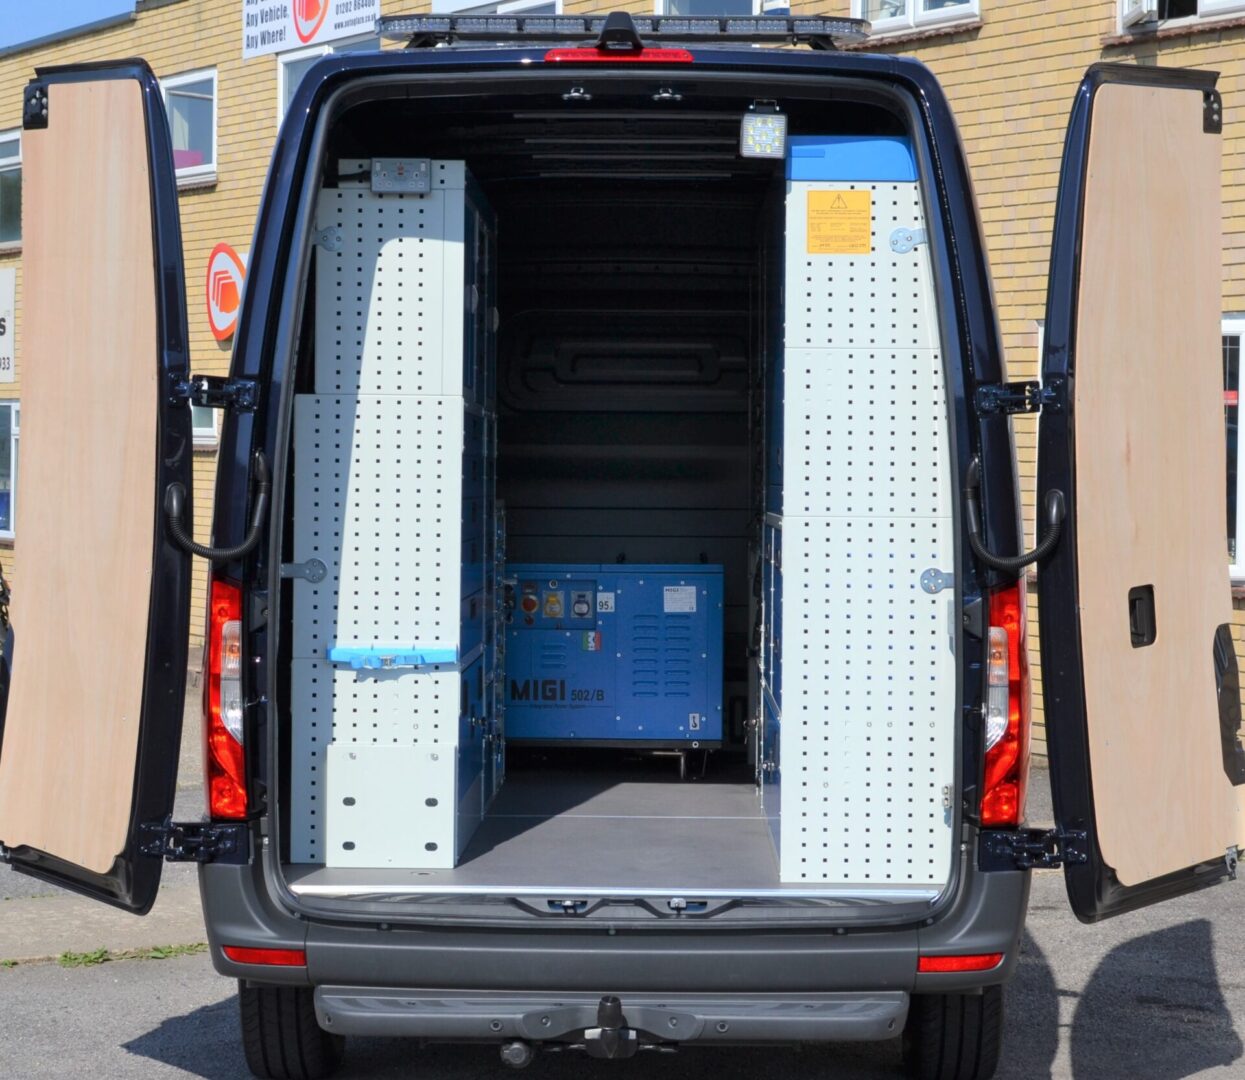 Completed van after racking, Migi and external beacons installed by Van Racking Solutions